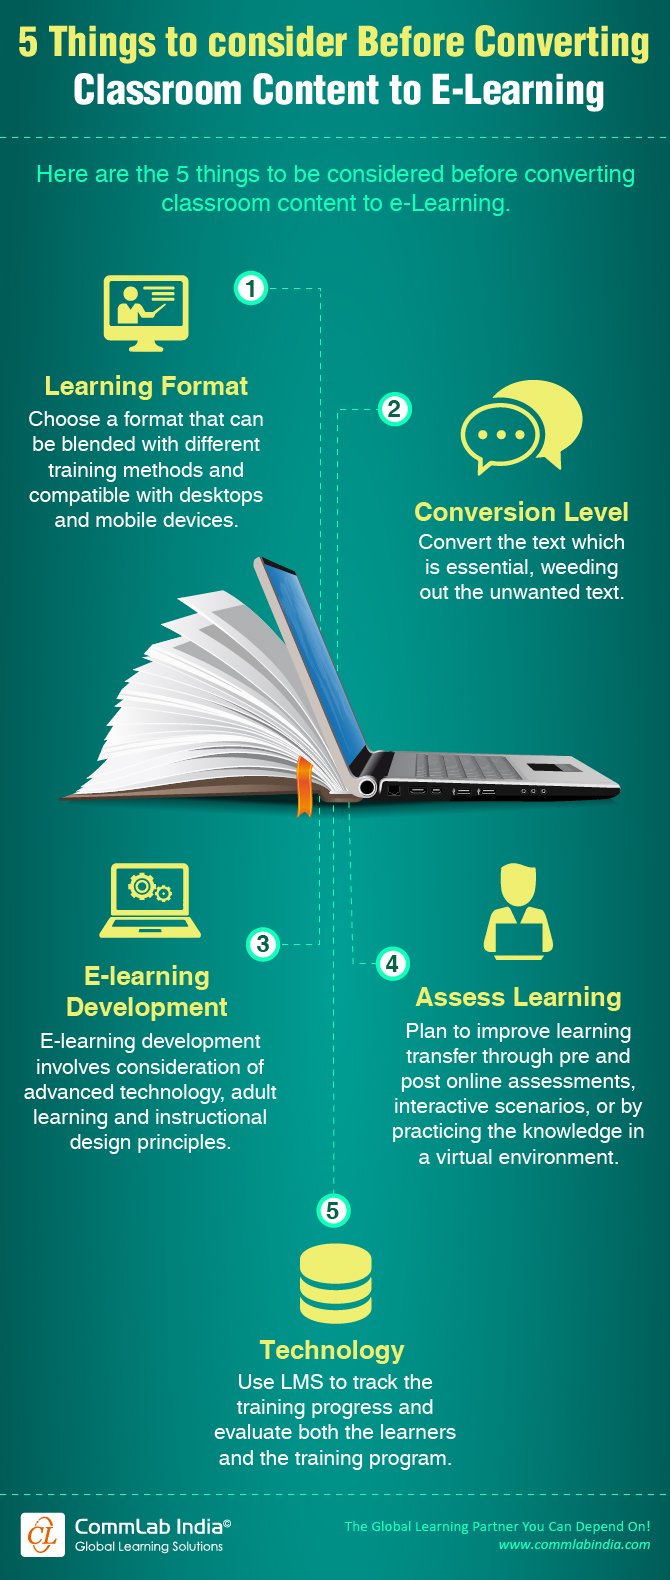 5 Things to Consider Before Converting Classroom Content to E-learning [Infographic]